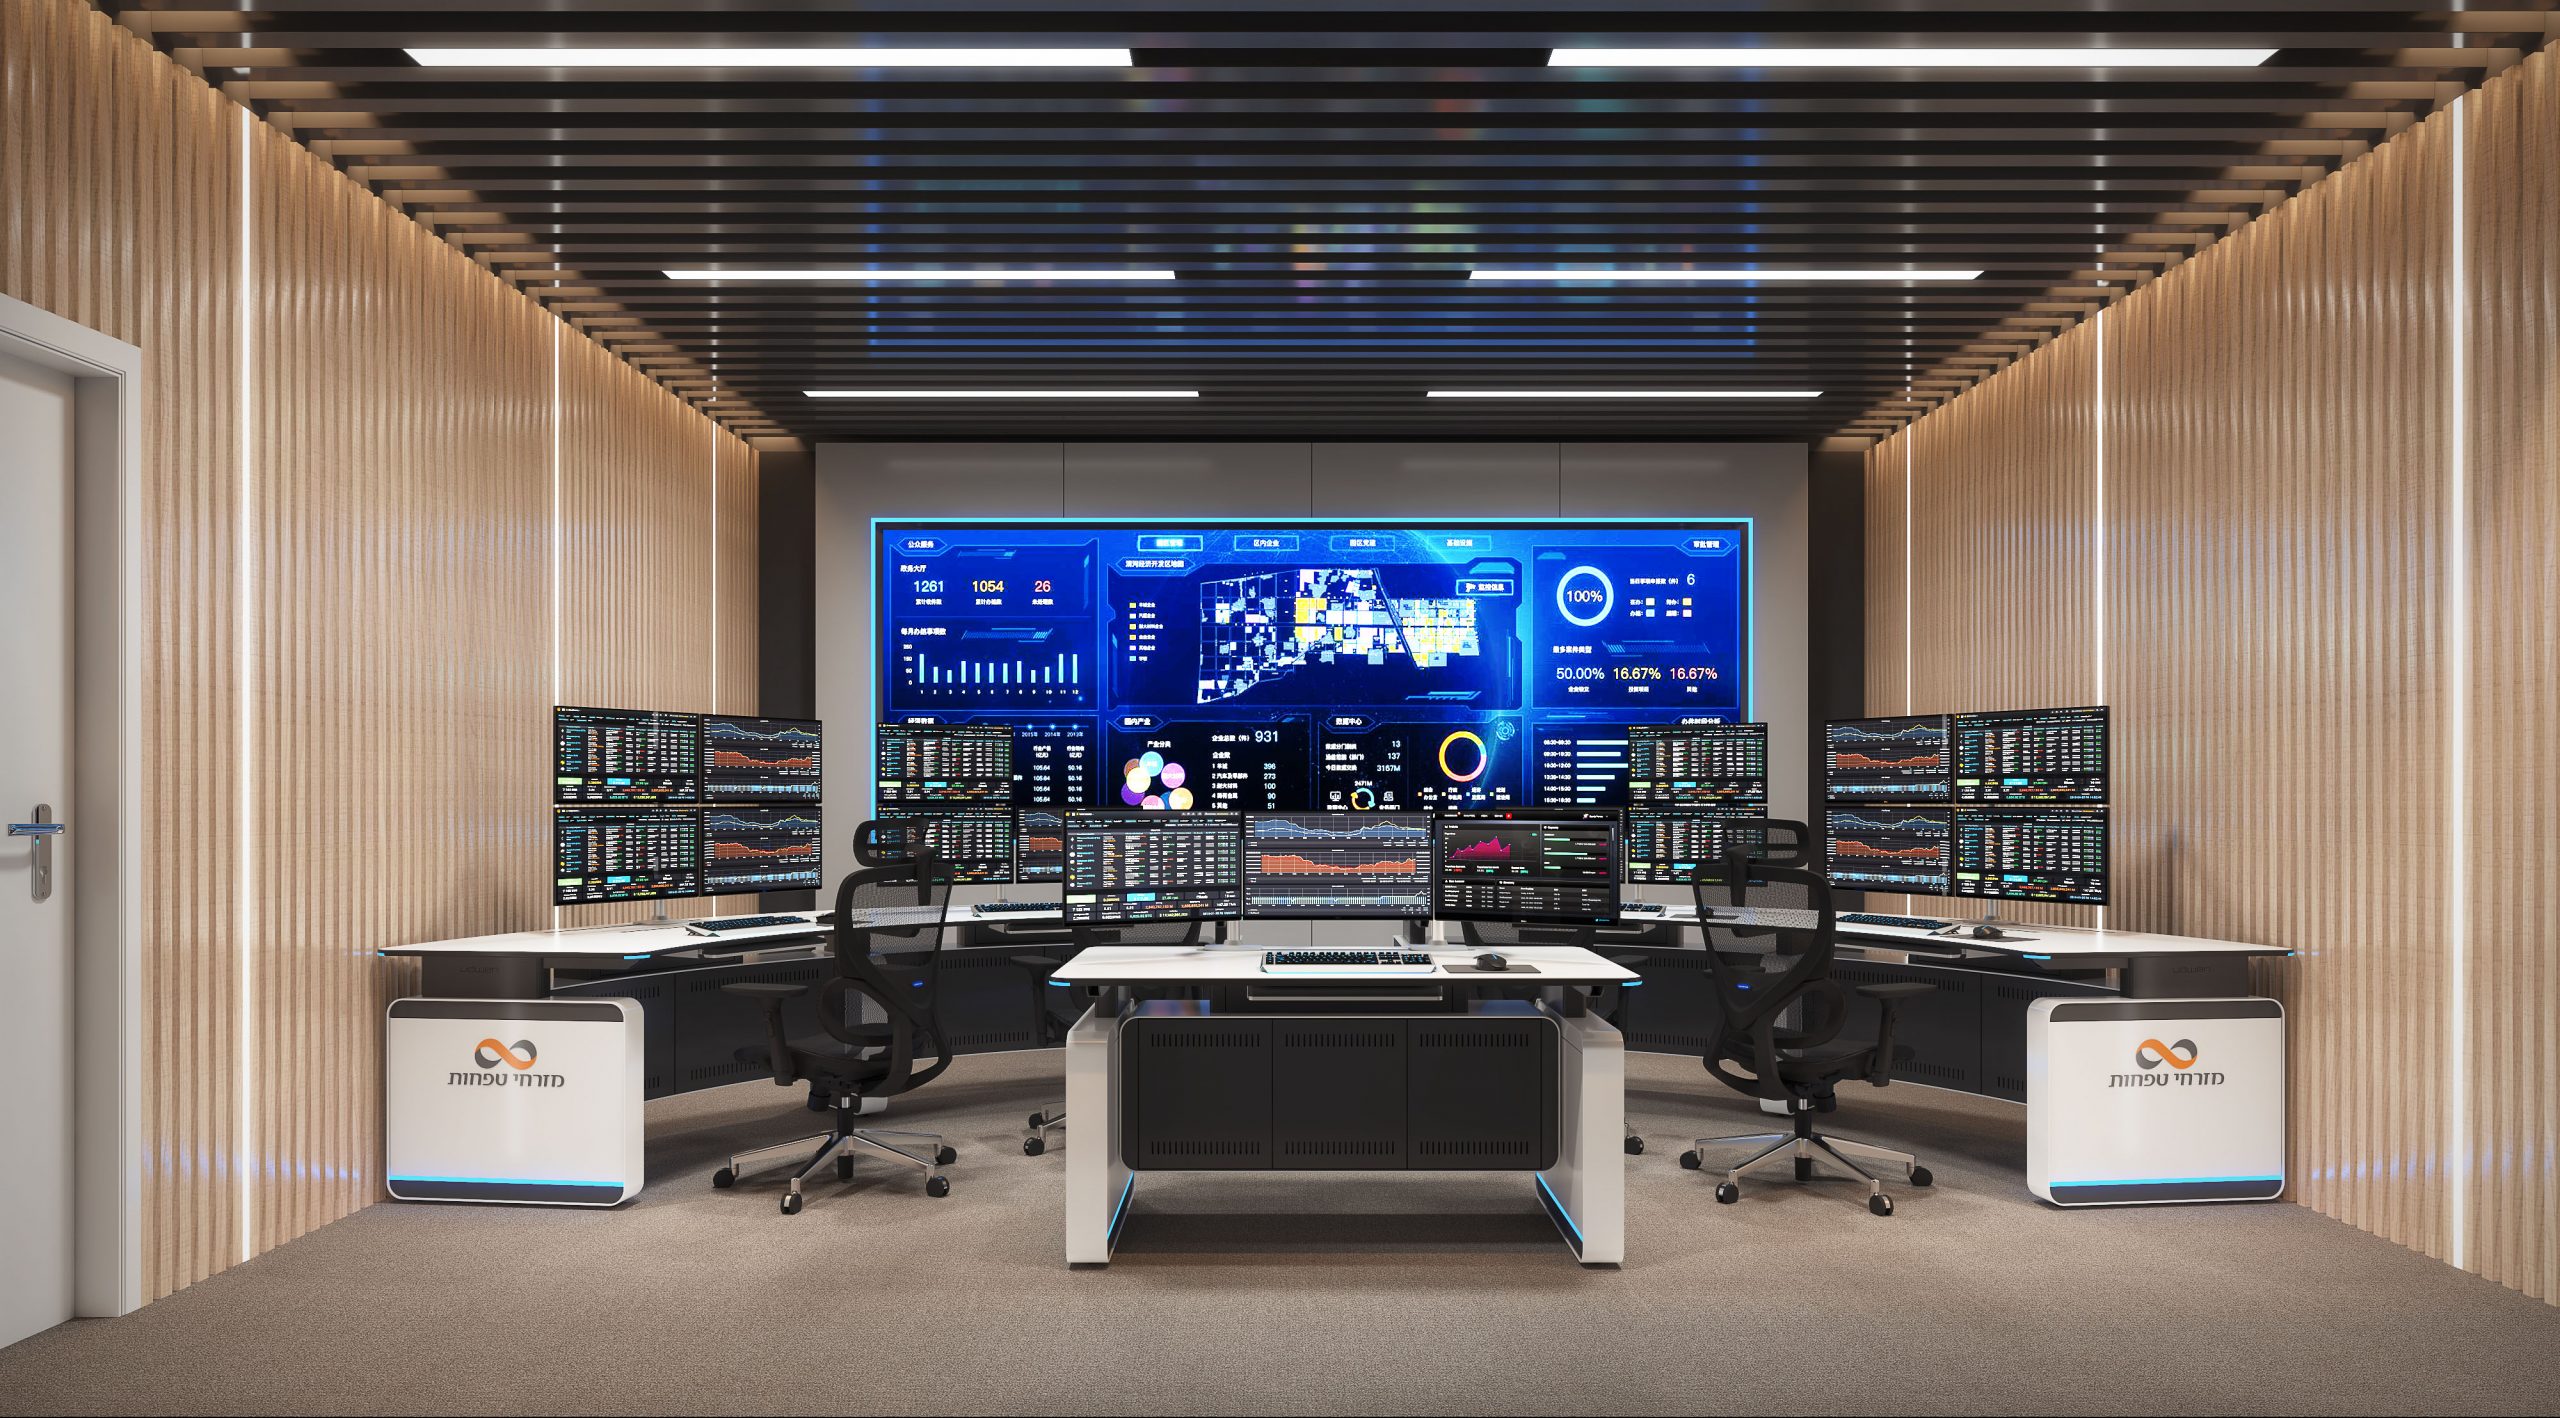 Industrial Control Room Desks: What You Need to Know